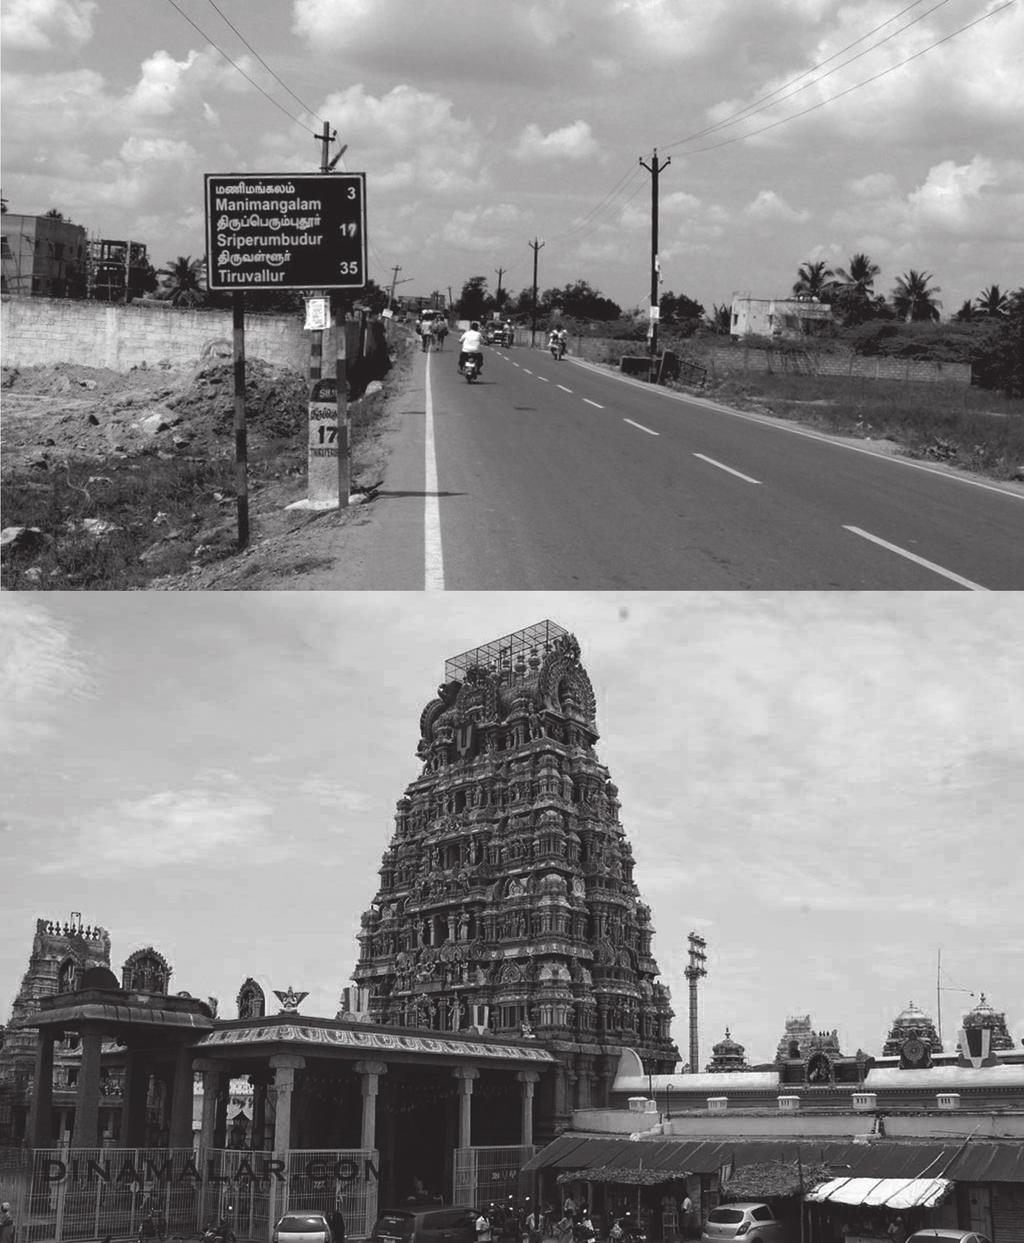 Views of the Sriperumpudur Poonamalle stretch on the NH4 -- Approach Road from